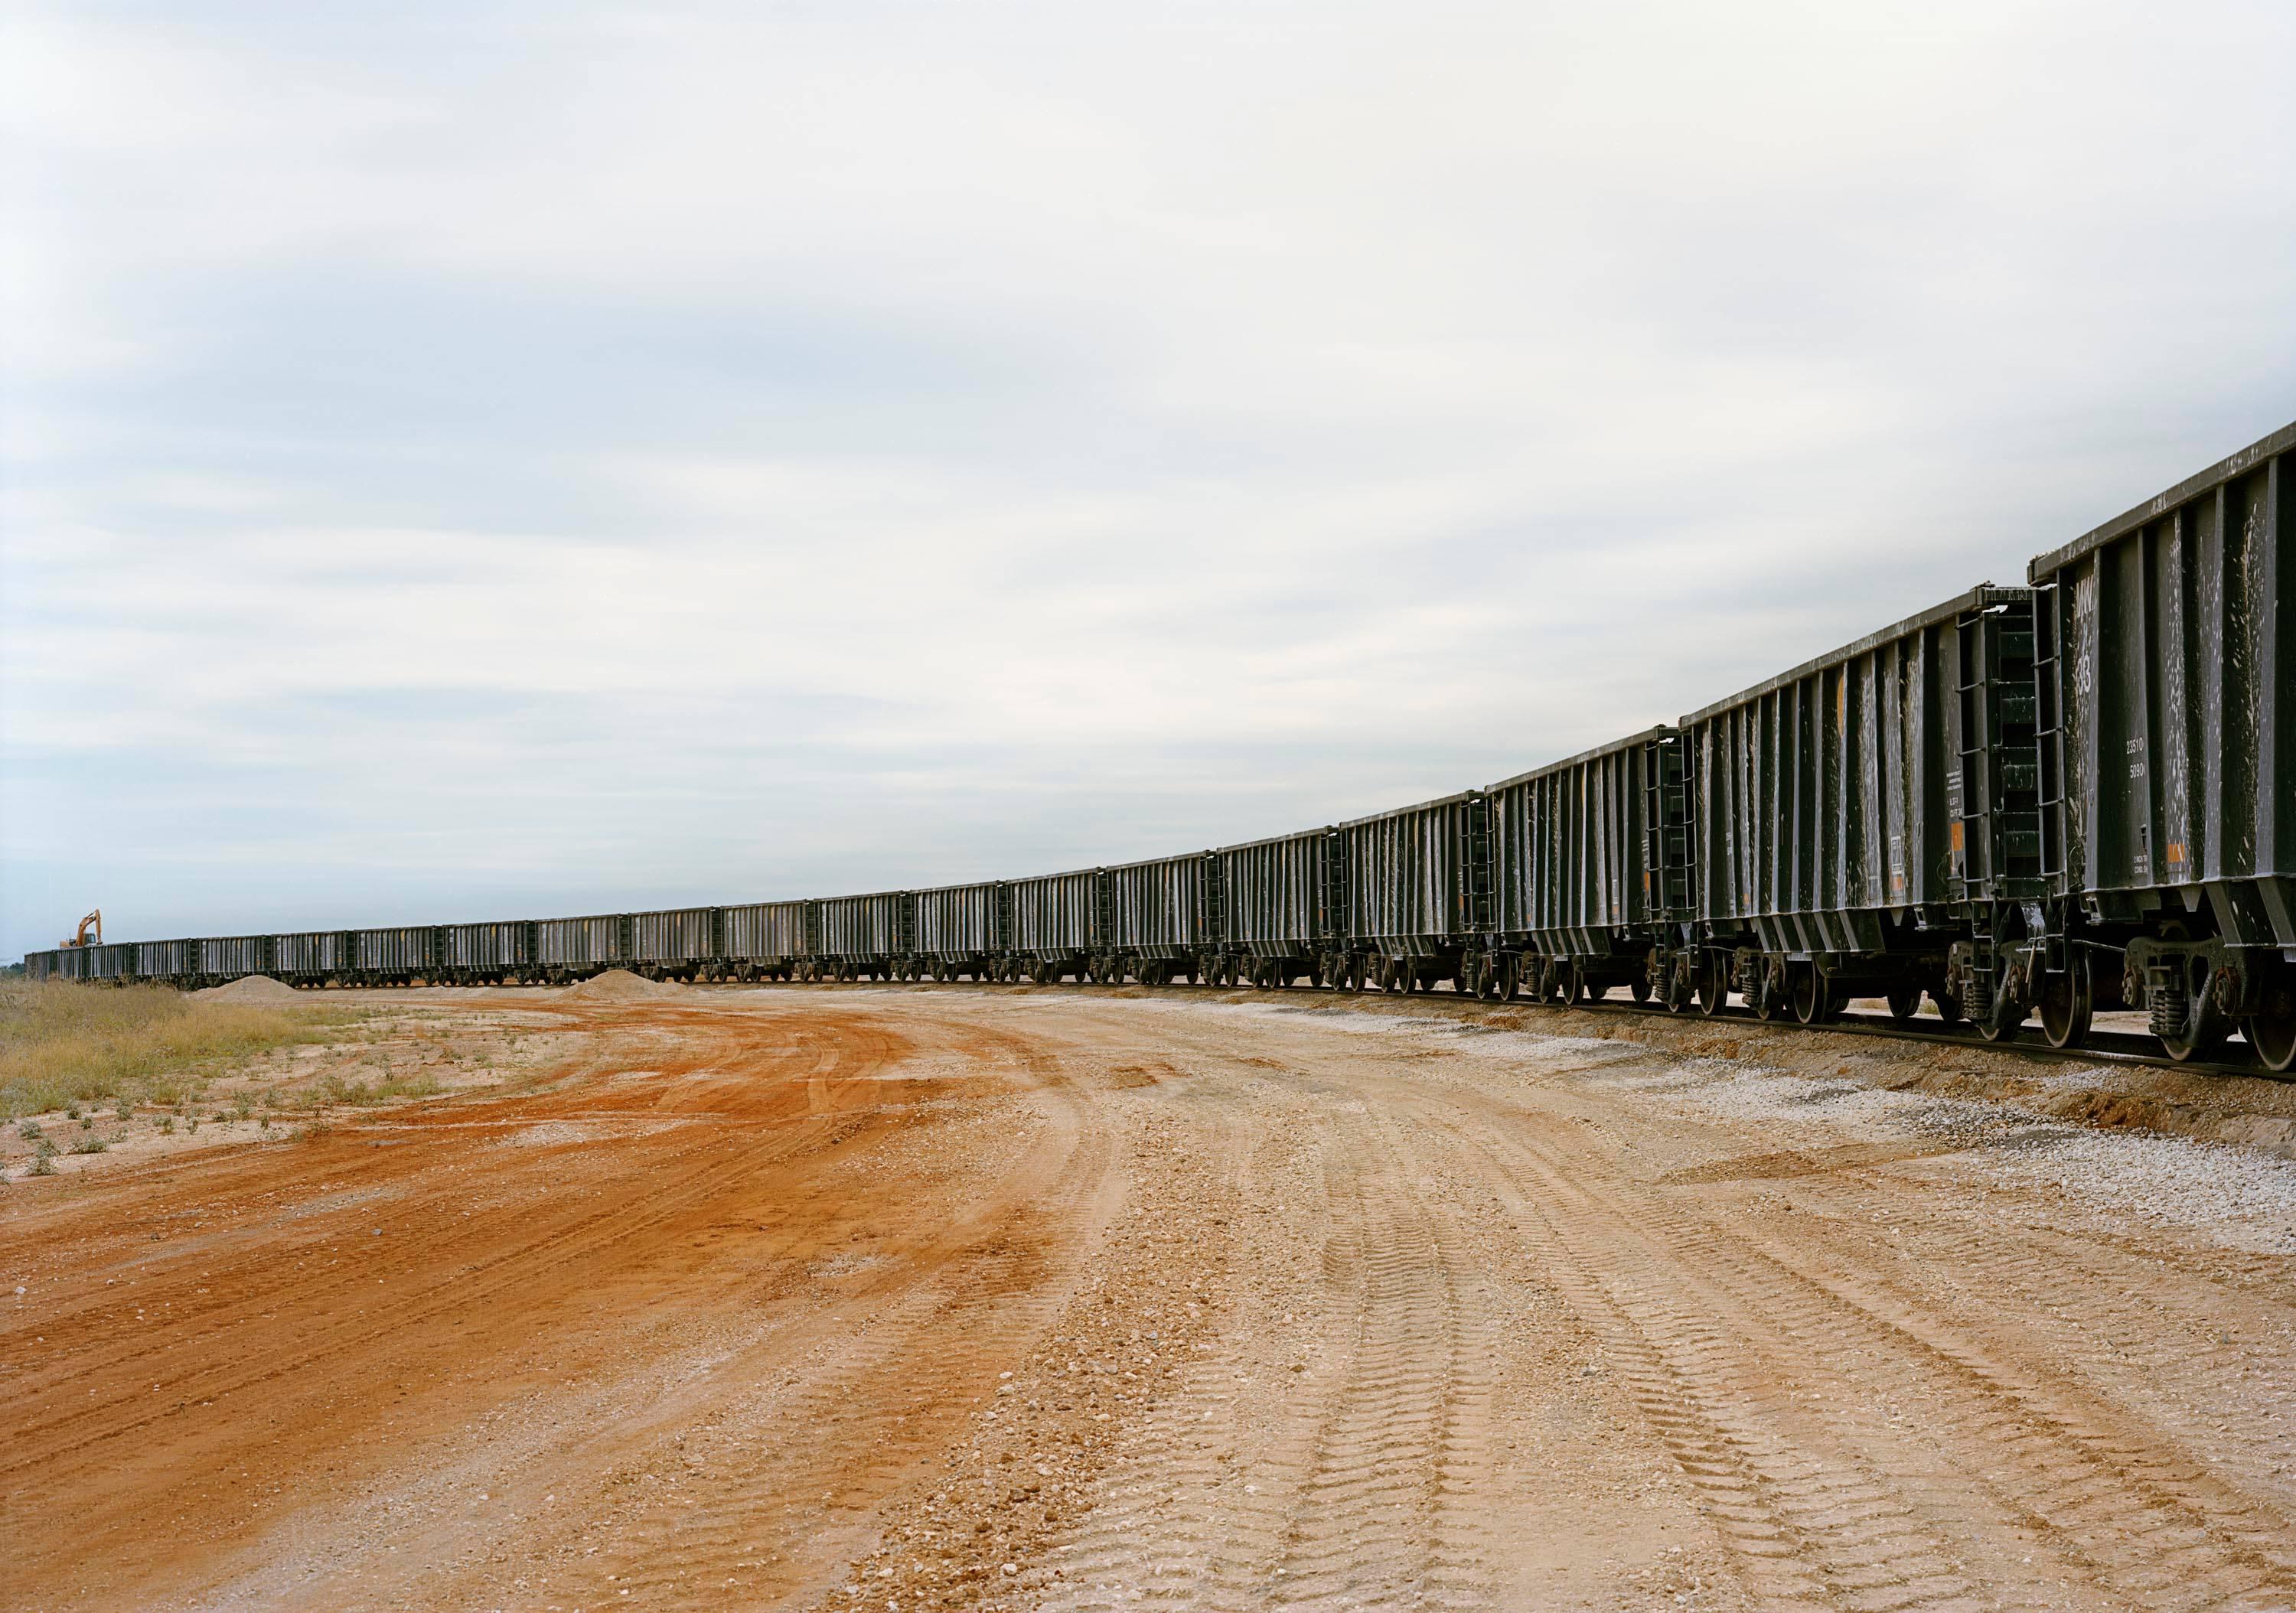 Victoria Sambunaris
Untitled (rail yard) and untitled (rail car unloading), Near Cotulla, TX, 2012 (diptych)
two chromogenic prints
Dimensions: 39 x 55 inches each
Edition of five.